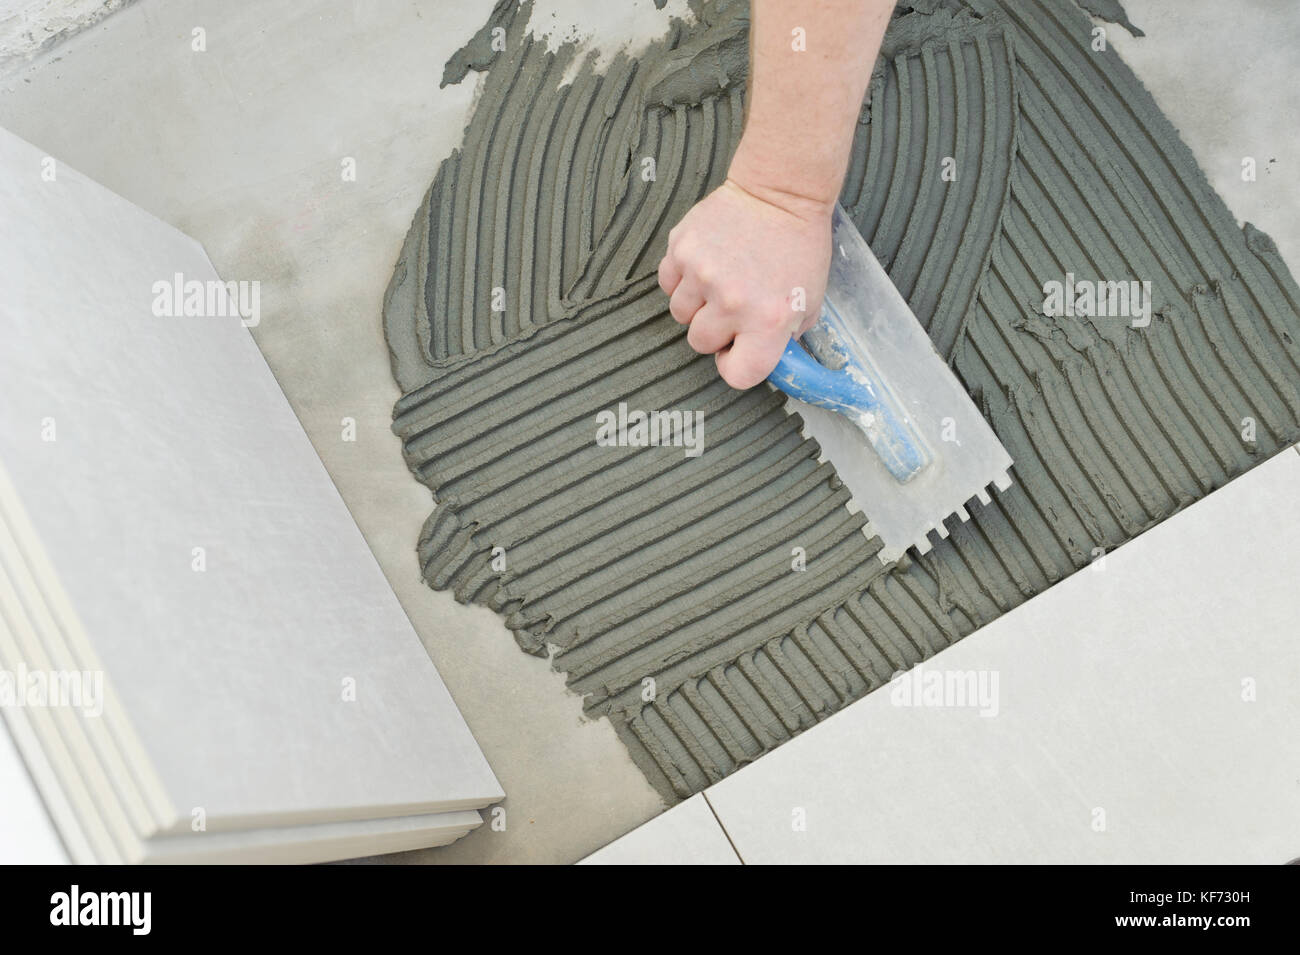 Contractor Laying Tile Floor House Stock Photos Contractor